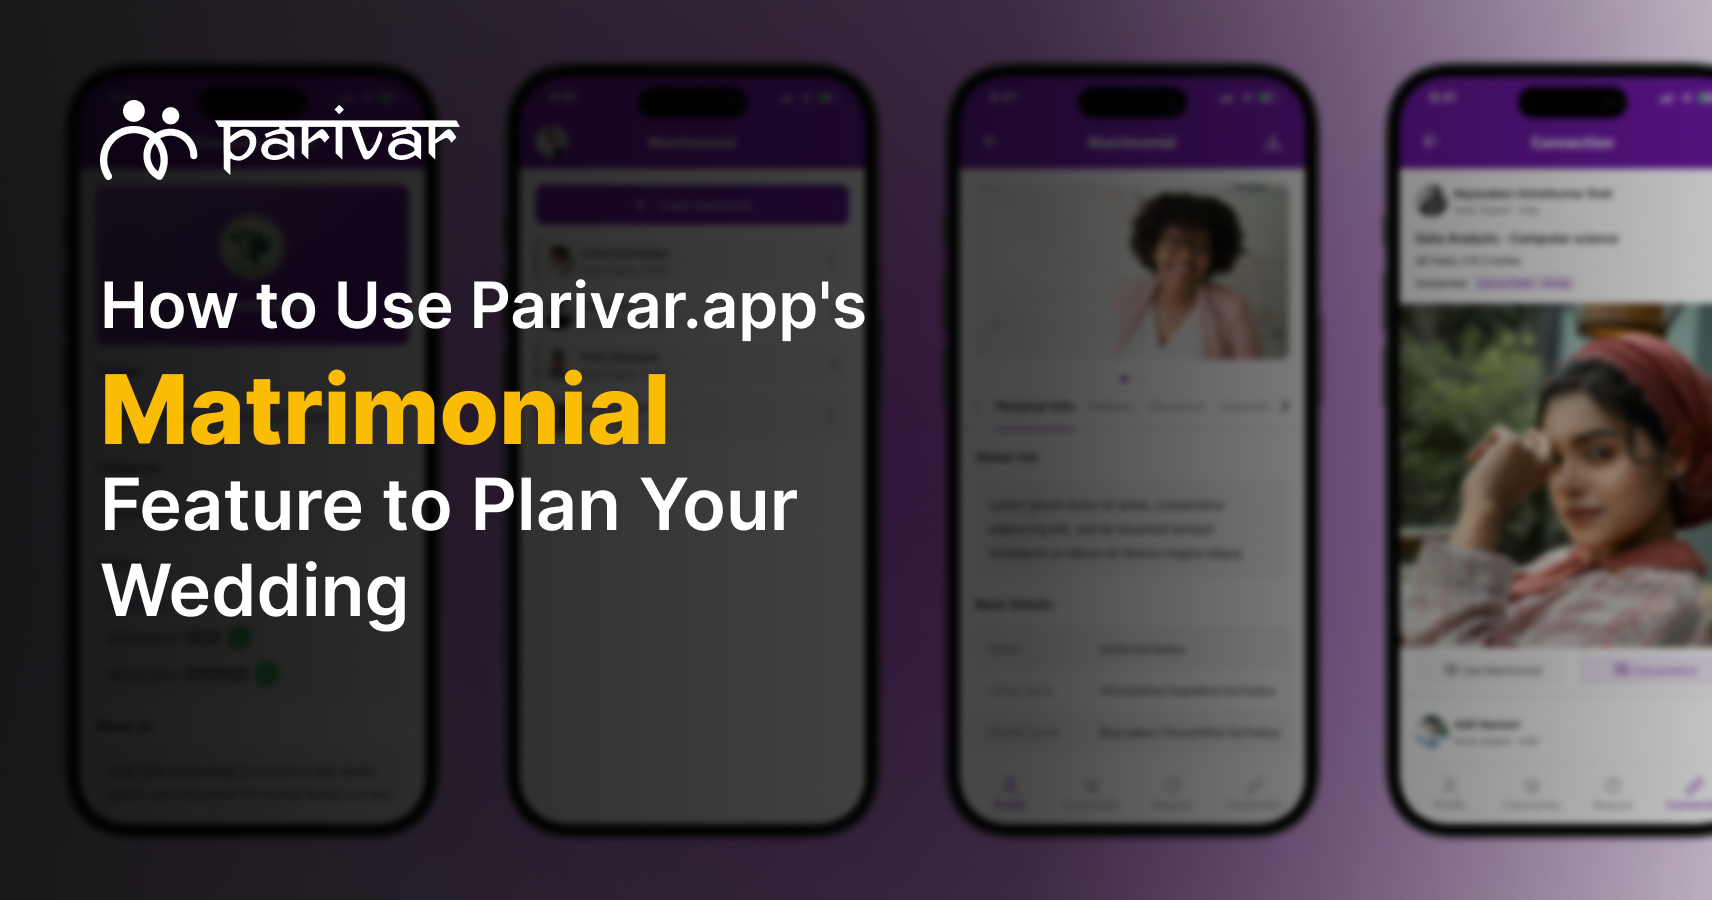 How to Use Parivar.app's Matrimonial Feature to Plan Your Wedding